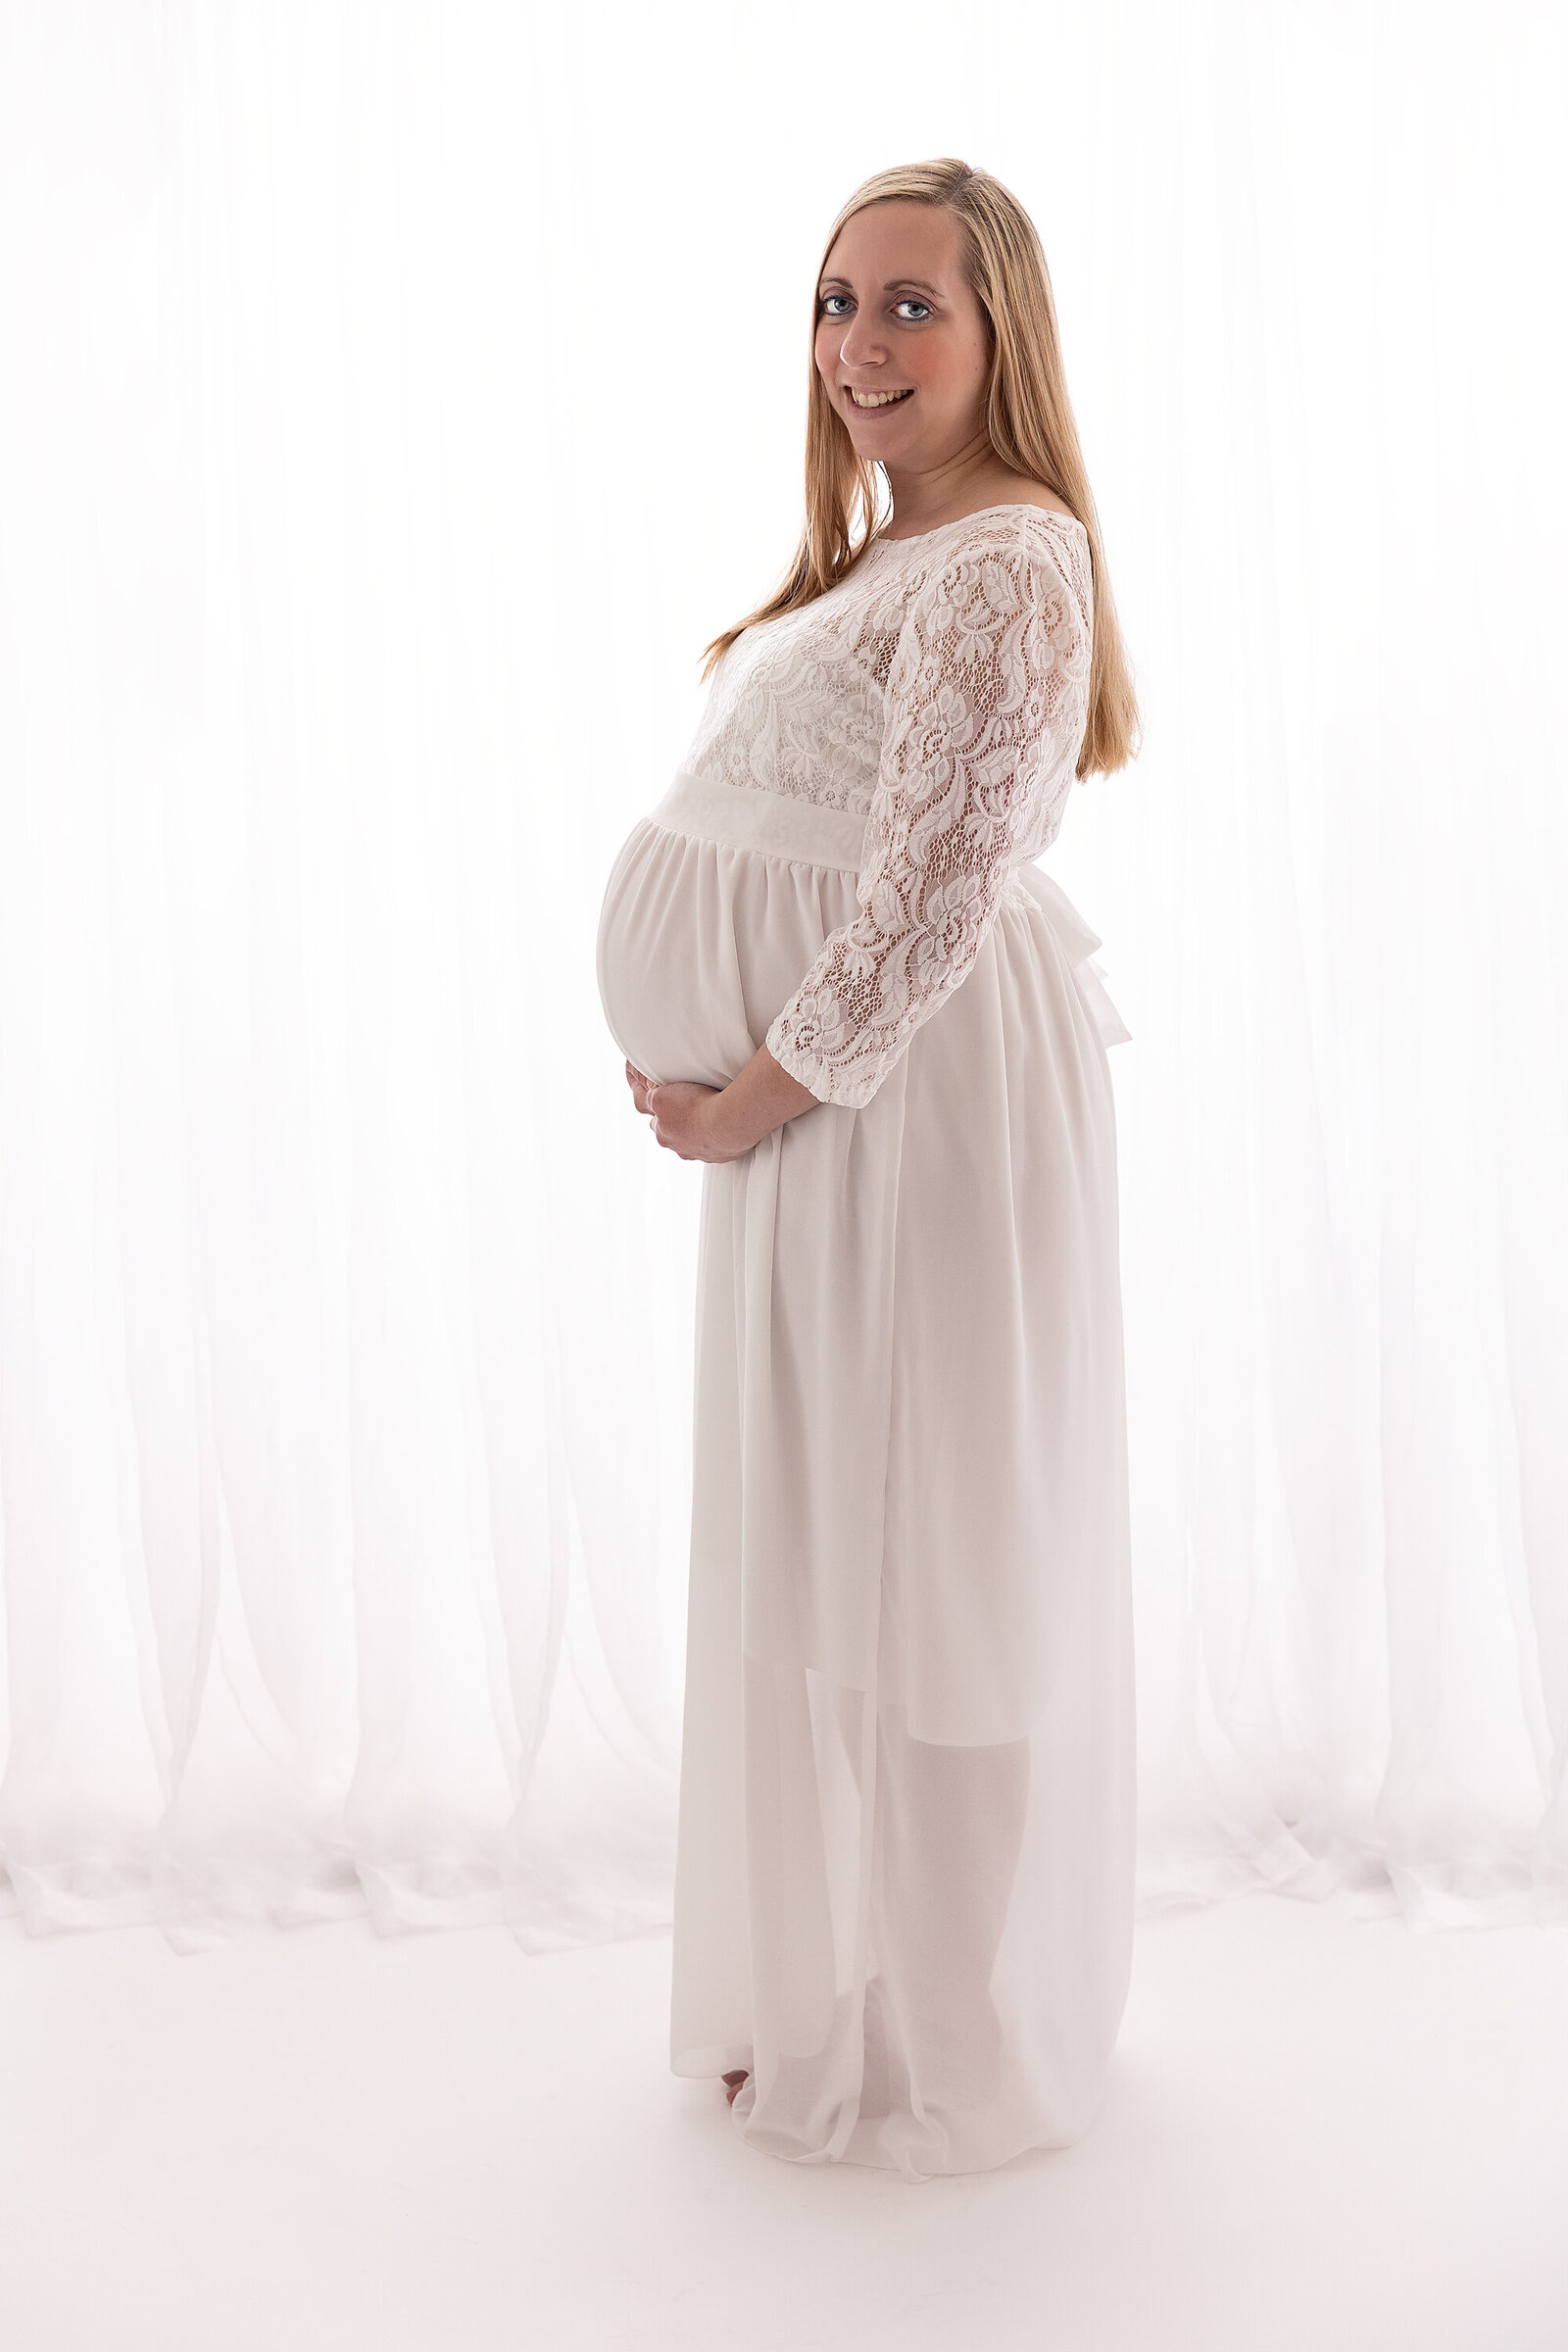 backlit studio portrait of pregnant woman looking at camera by PHILADELPHIA MATERNITY PHOTOGRAPHER